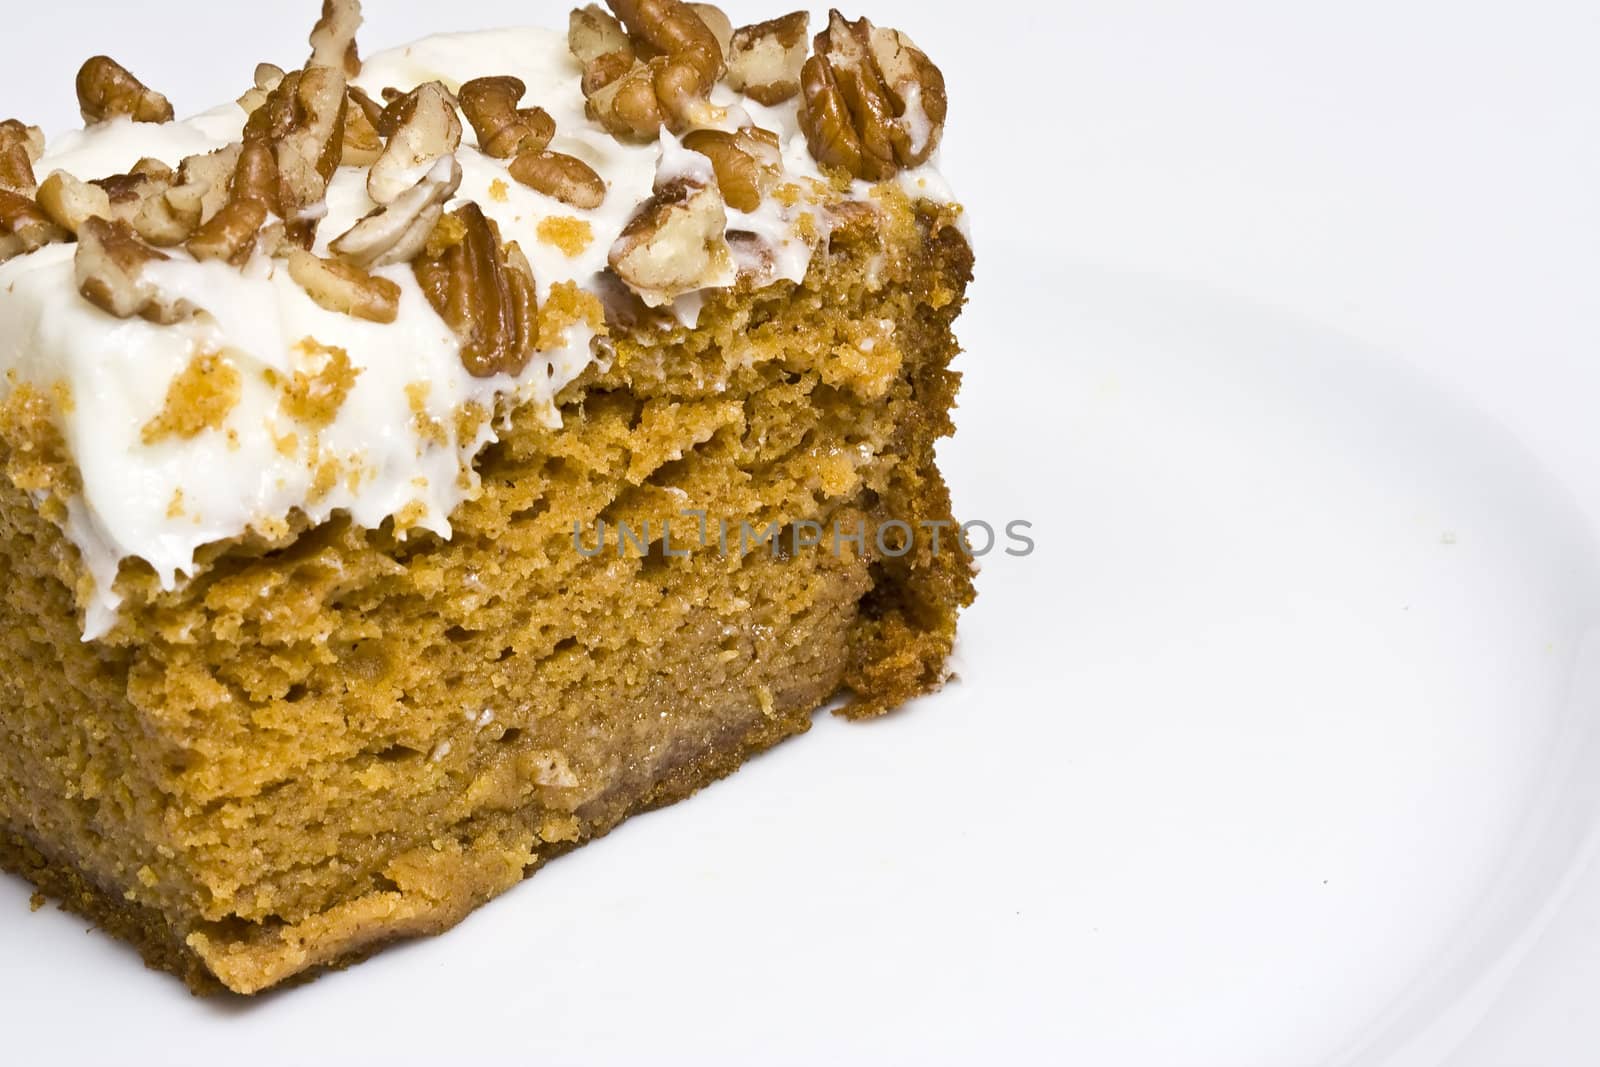 slice of pumpkin cake with cream cheese frosting, could pass for carrot cake though